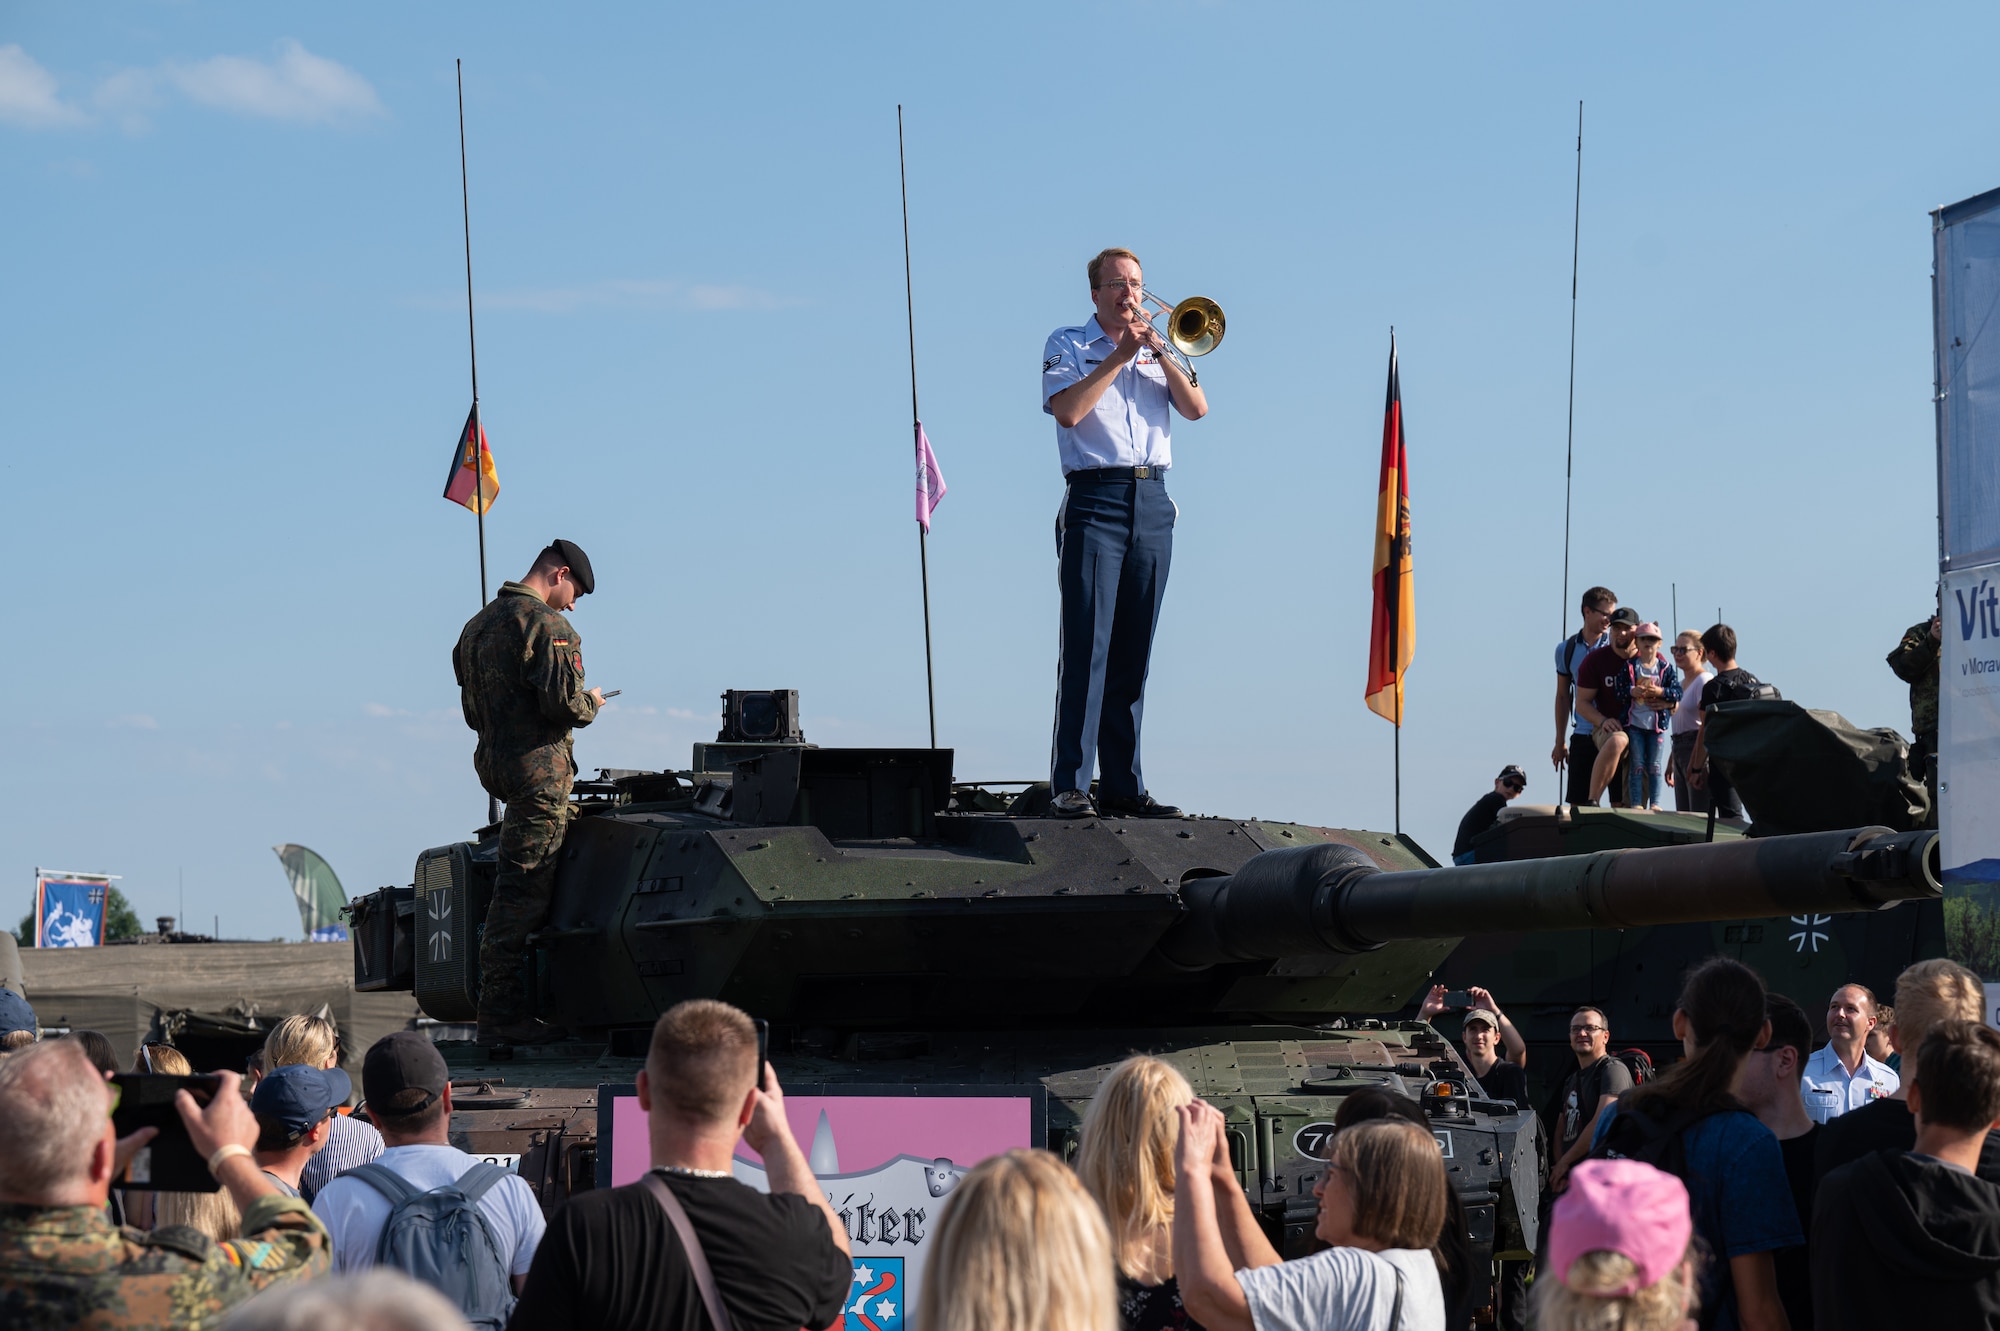 U.S. Air Force Senior Airman Tom Kelley, U.S. Air Forces in Europe Ceremonial Band trombonist, performs a tune while standing on a German military tank during the NATO Days event at Leoš Janáček Airport in Ostrava, Czech Republic, Sept. 17, 2023.